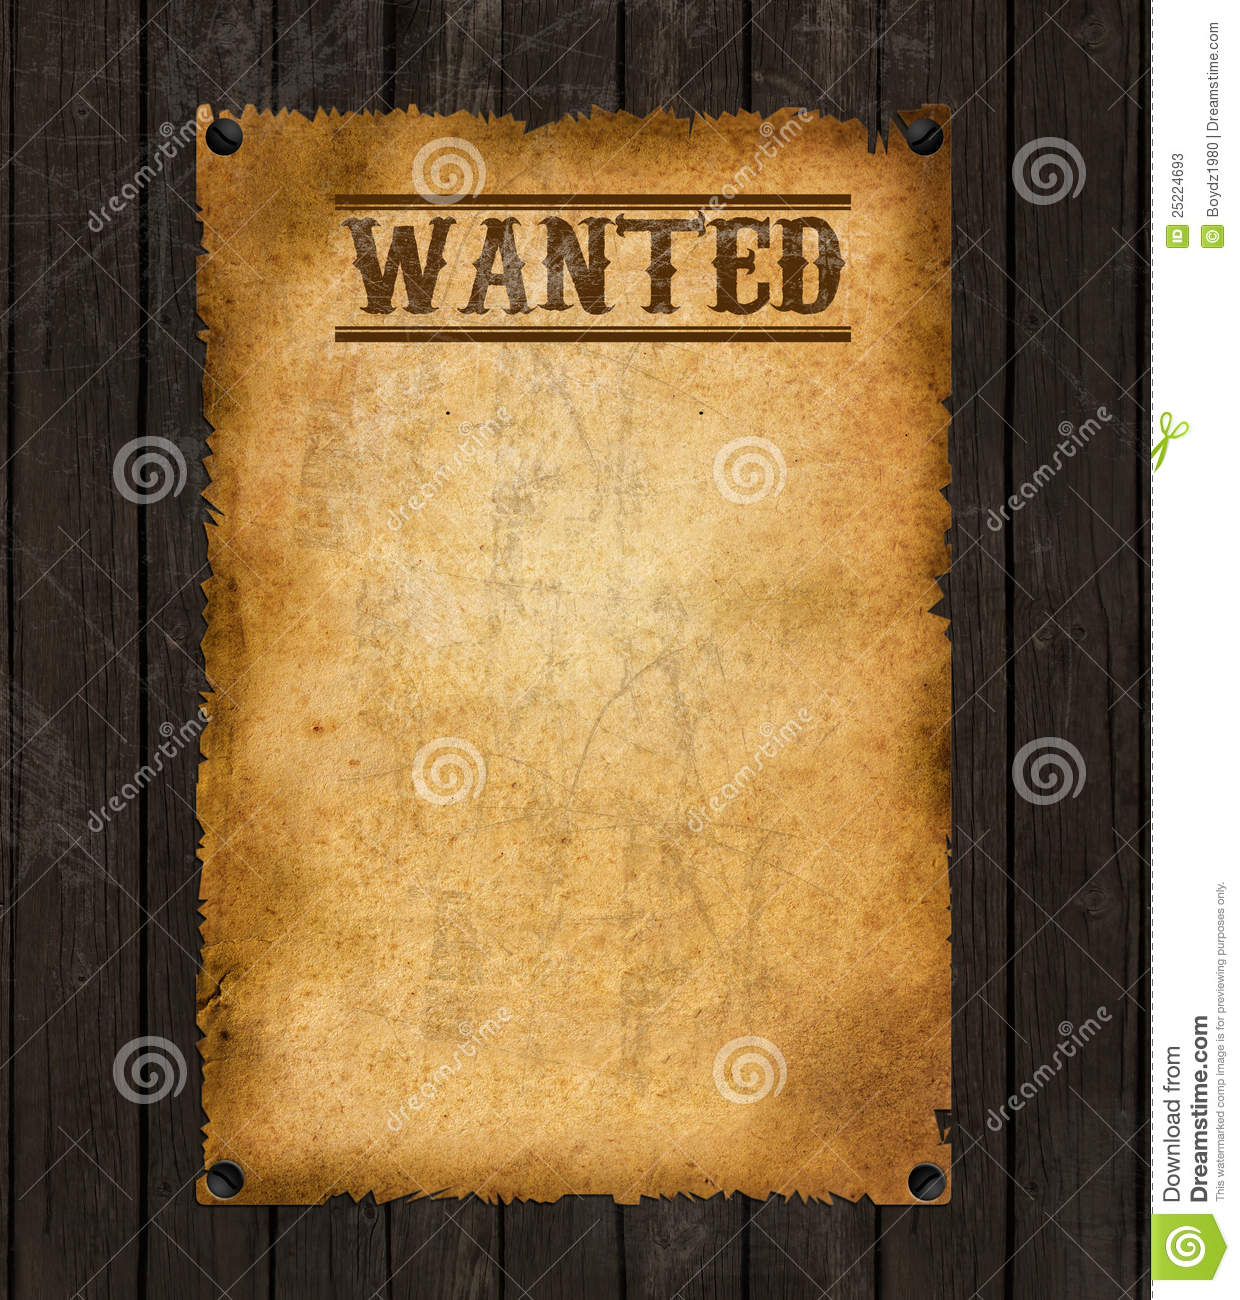 Old Western Wanted Poster Stock Photos   Image  25224693